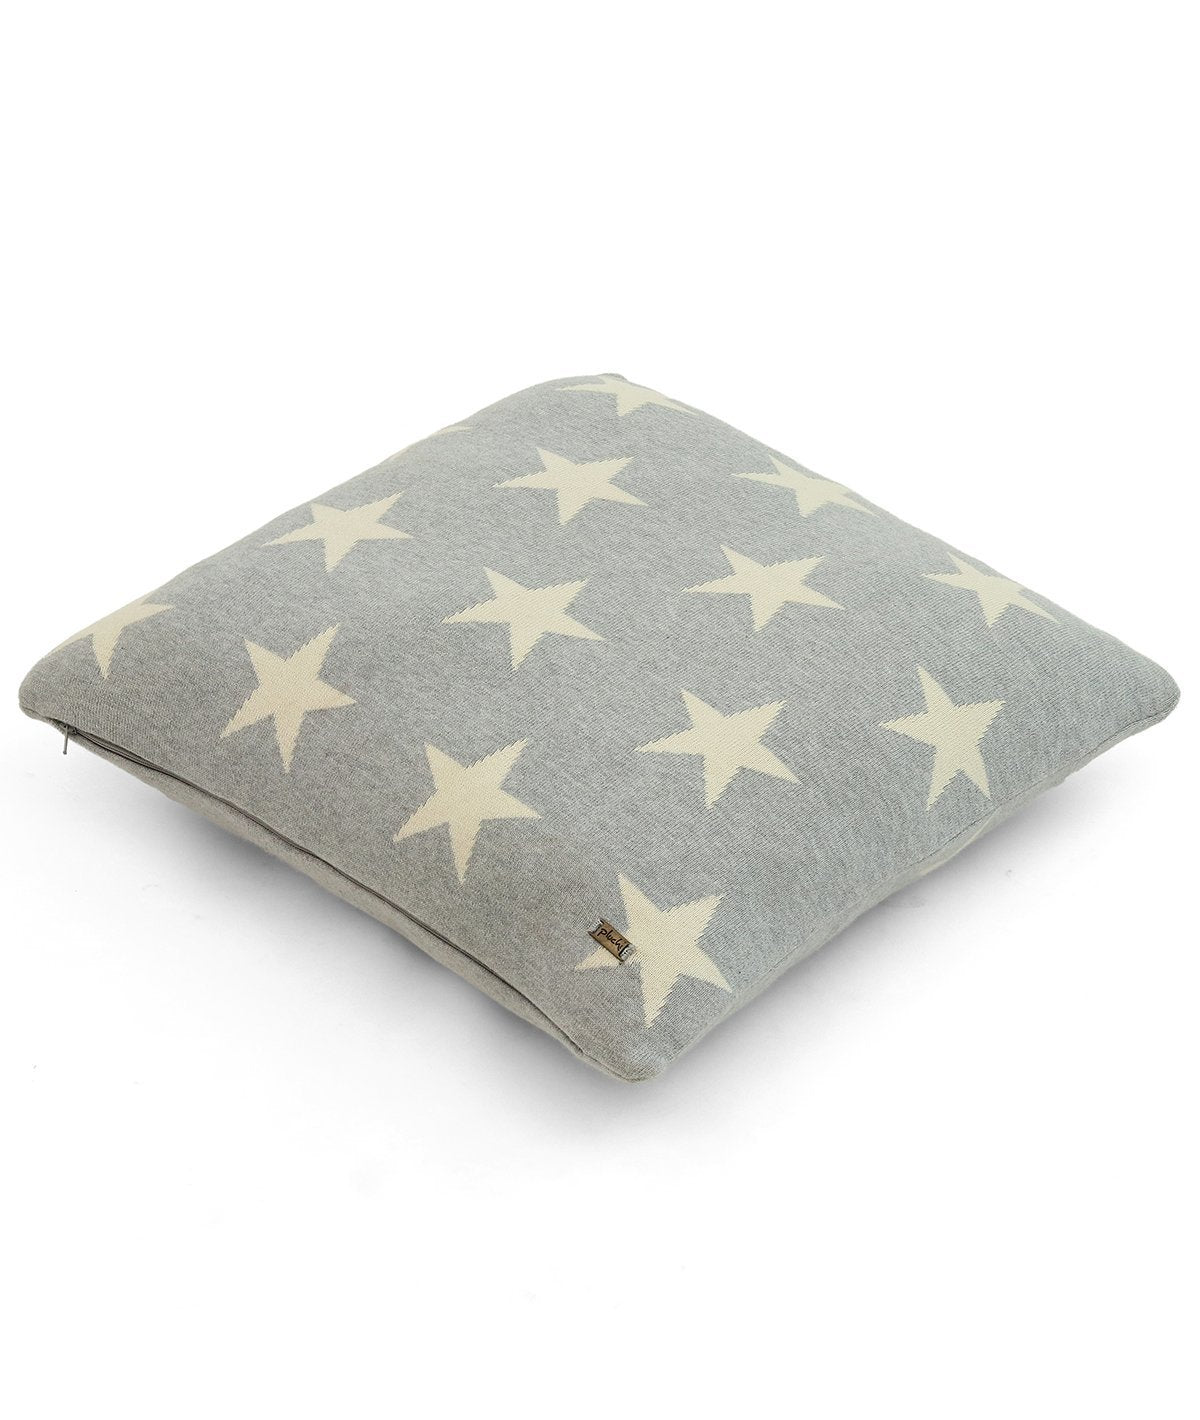 Star Cotton Knitted Decorative Grey Melange Color 20 x 20 Inches Cushion Cover